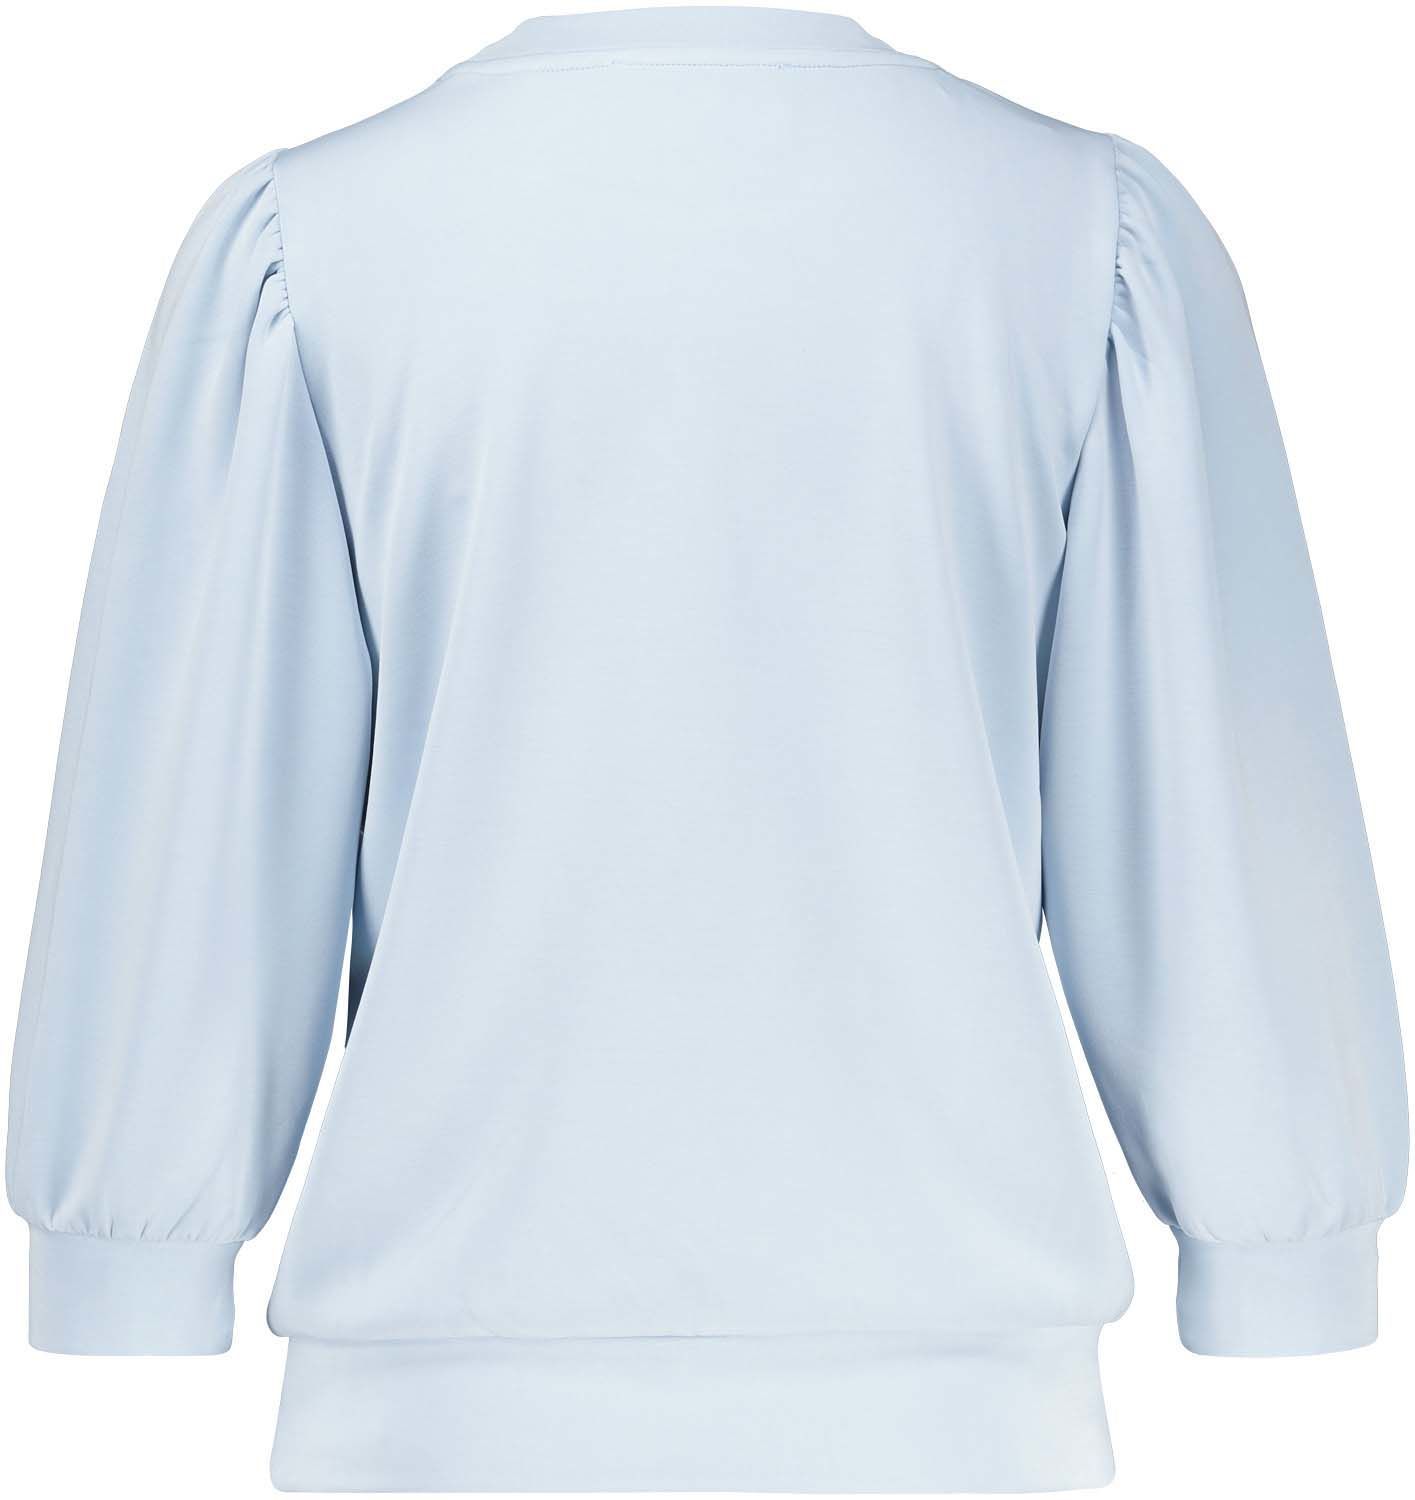 Selected Femme Top Tenny Blauw 